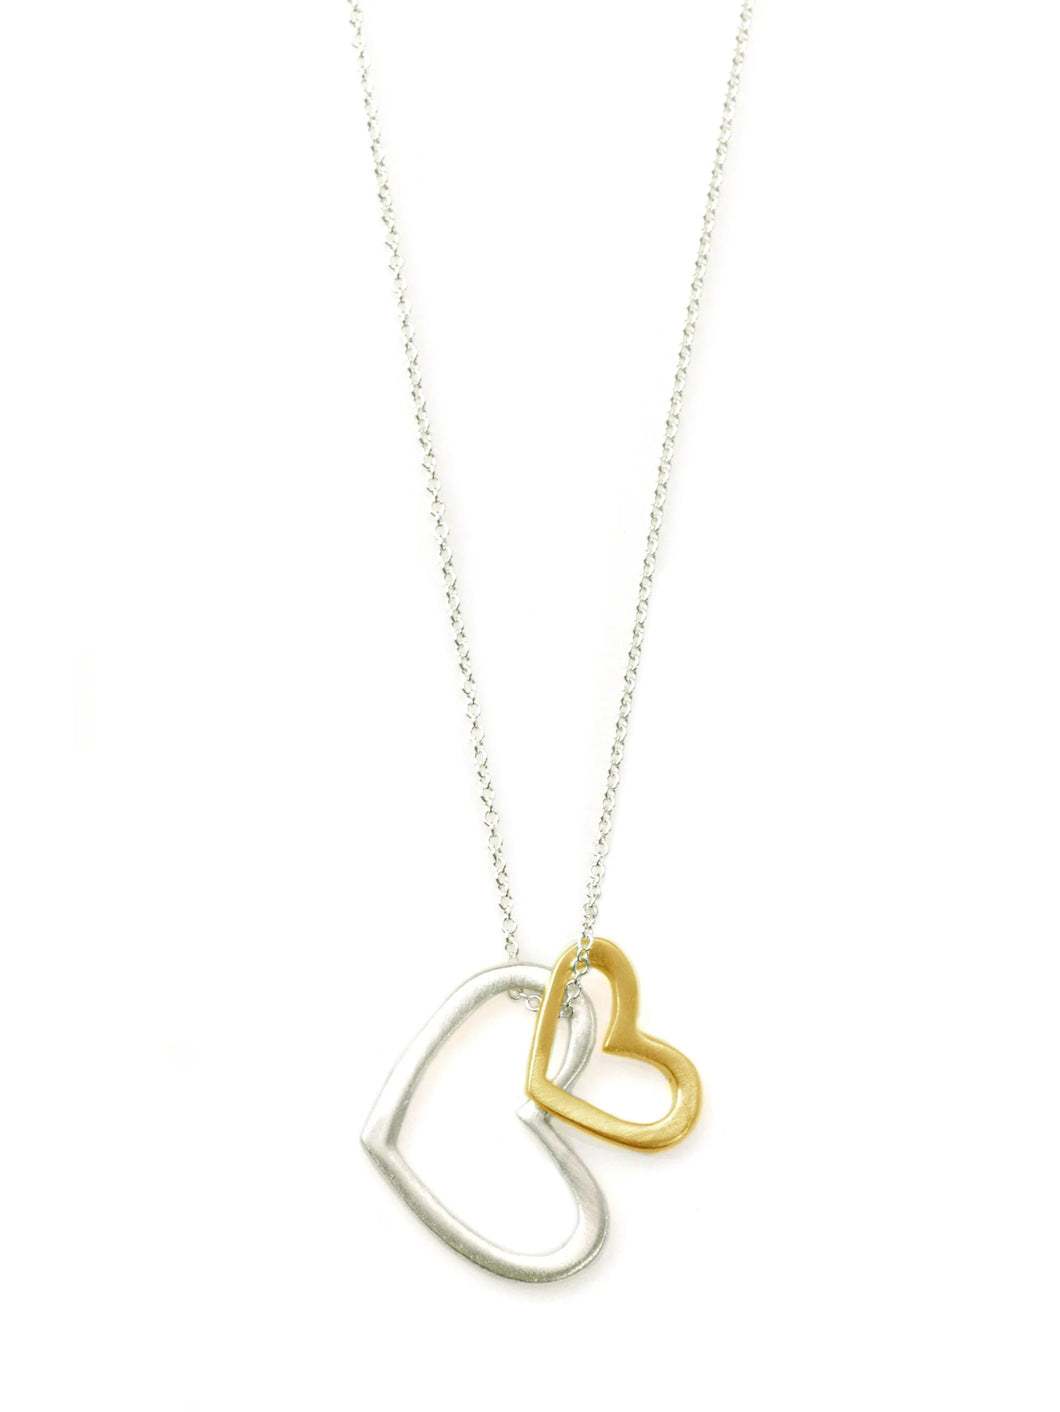 Two Open Hearts Sterling Silver and Vermeil Necklace